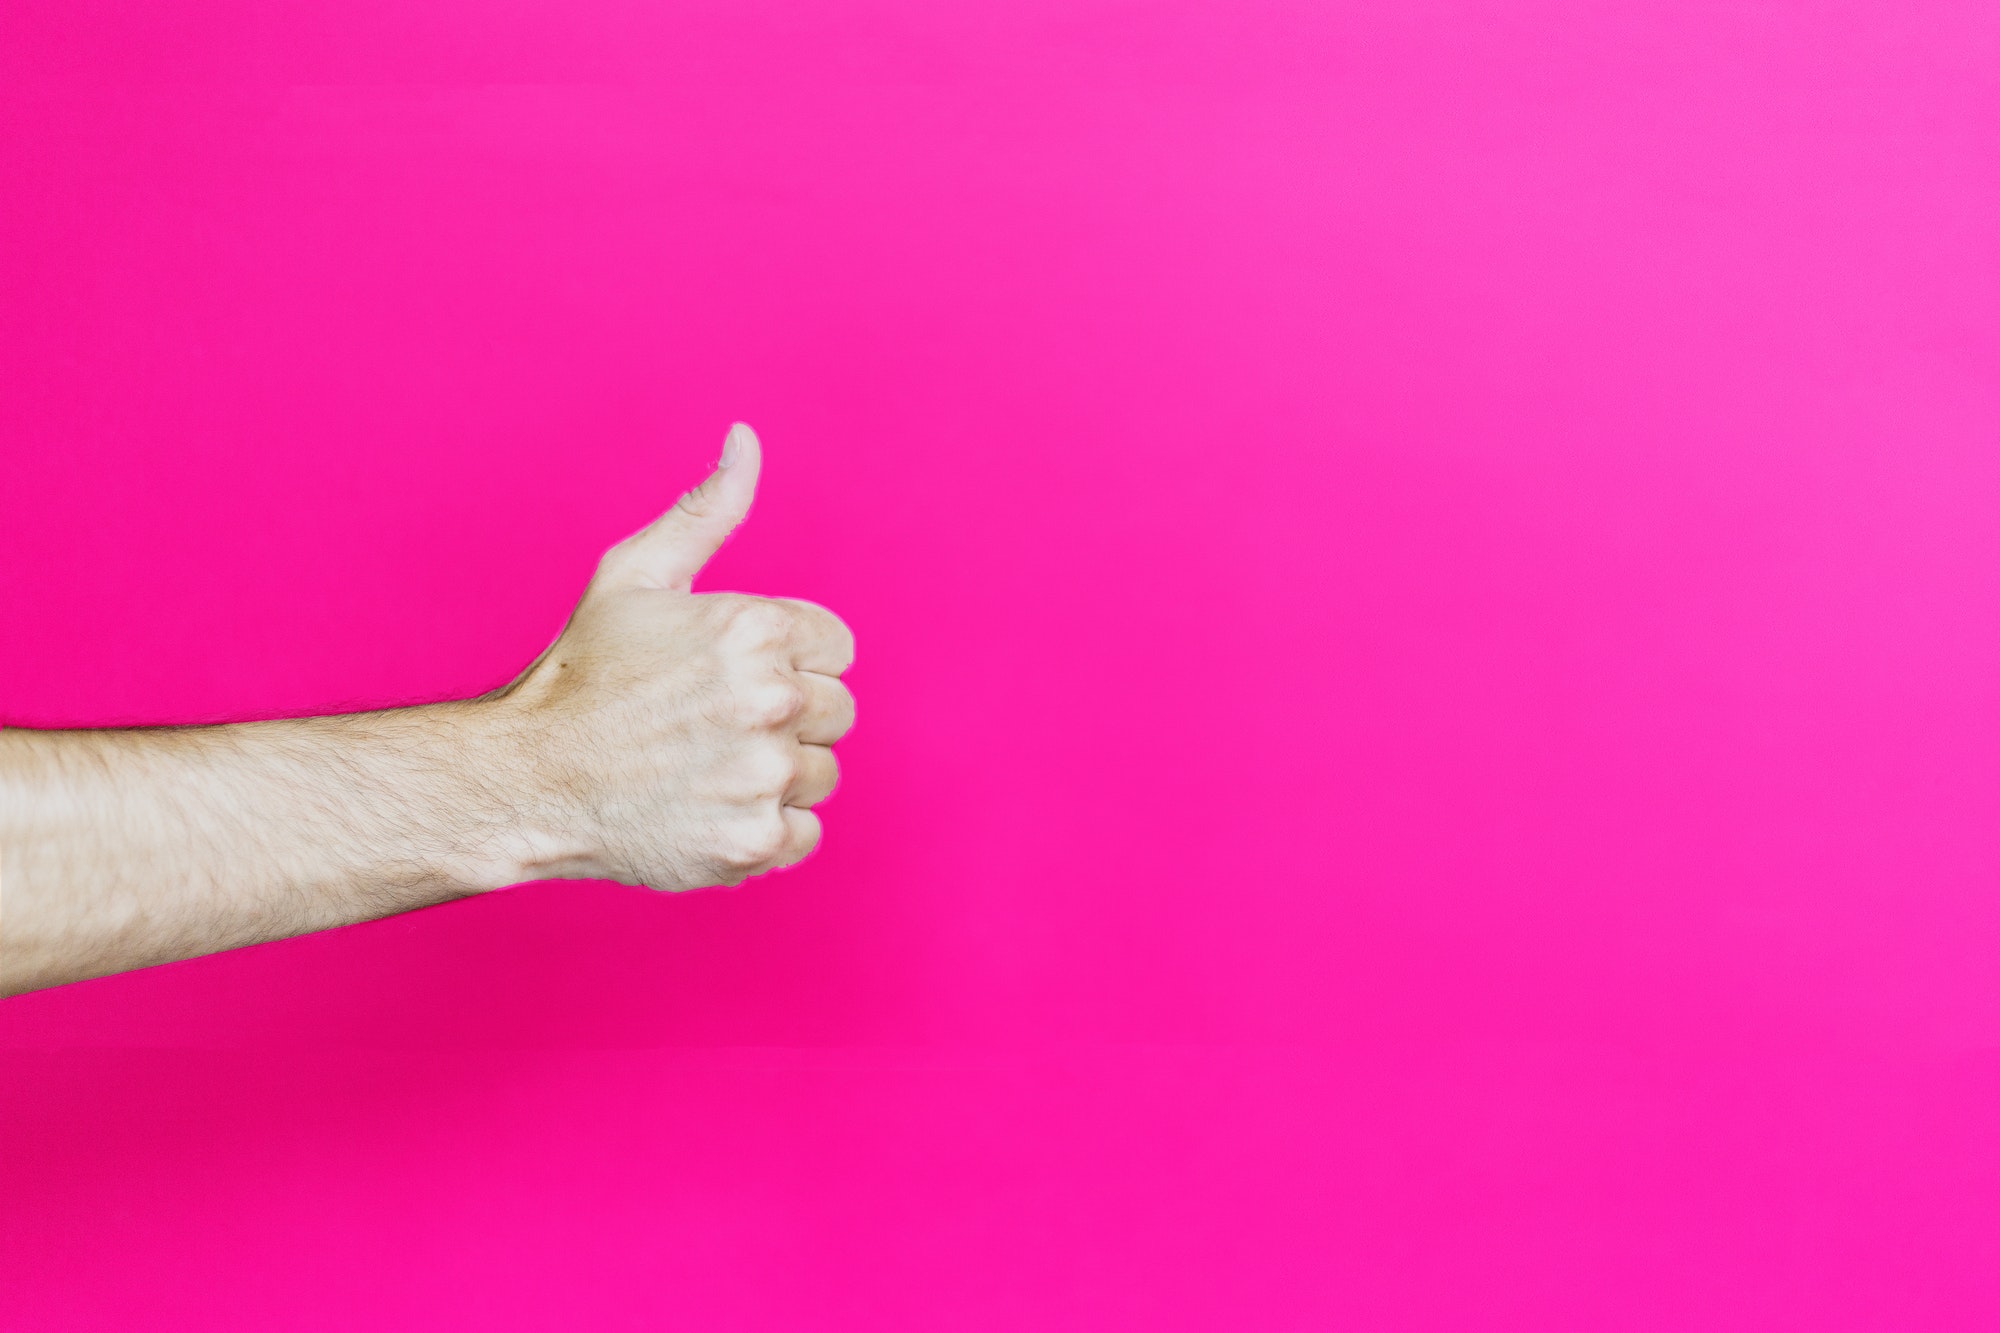 Hand doing “ok” sign on purple background